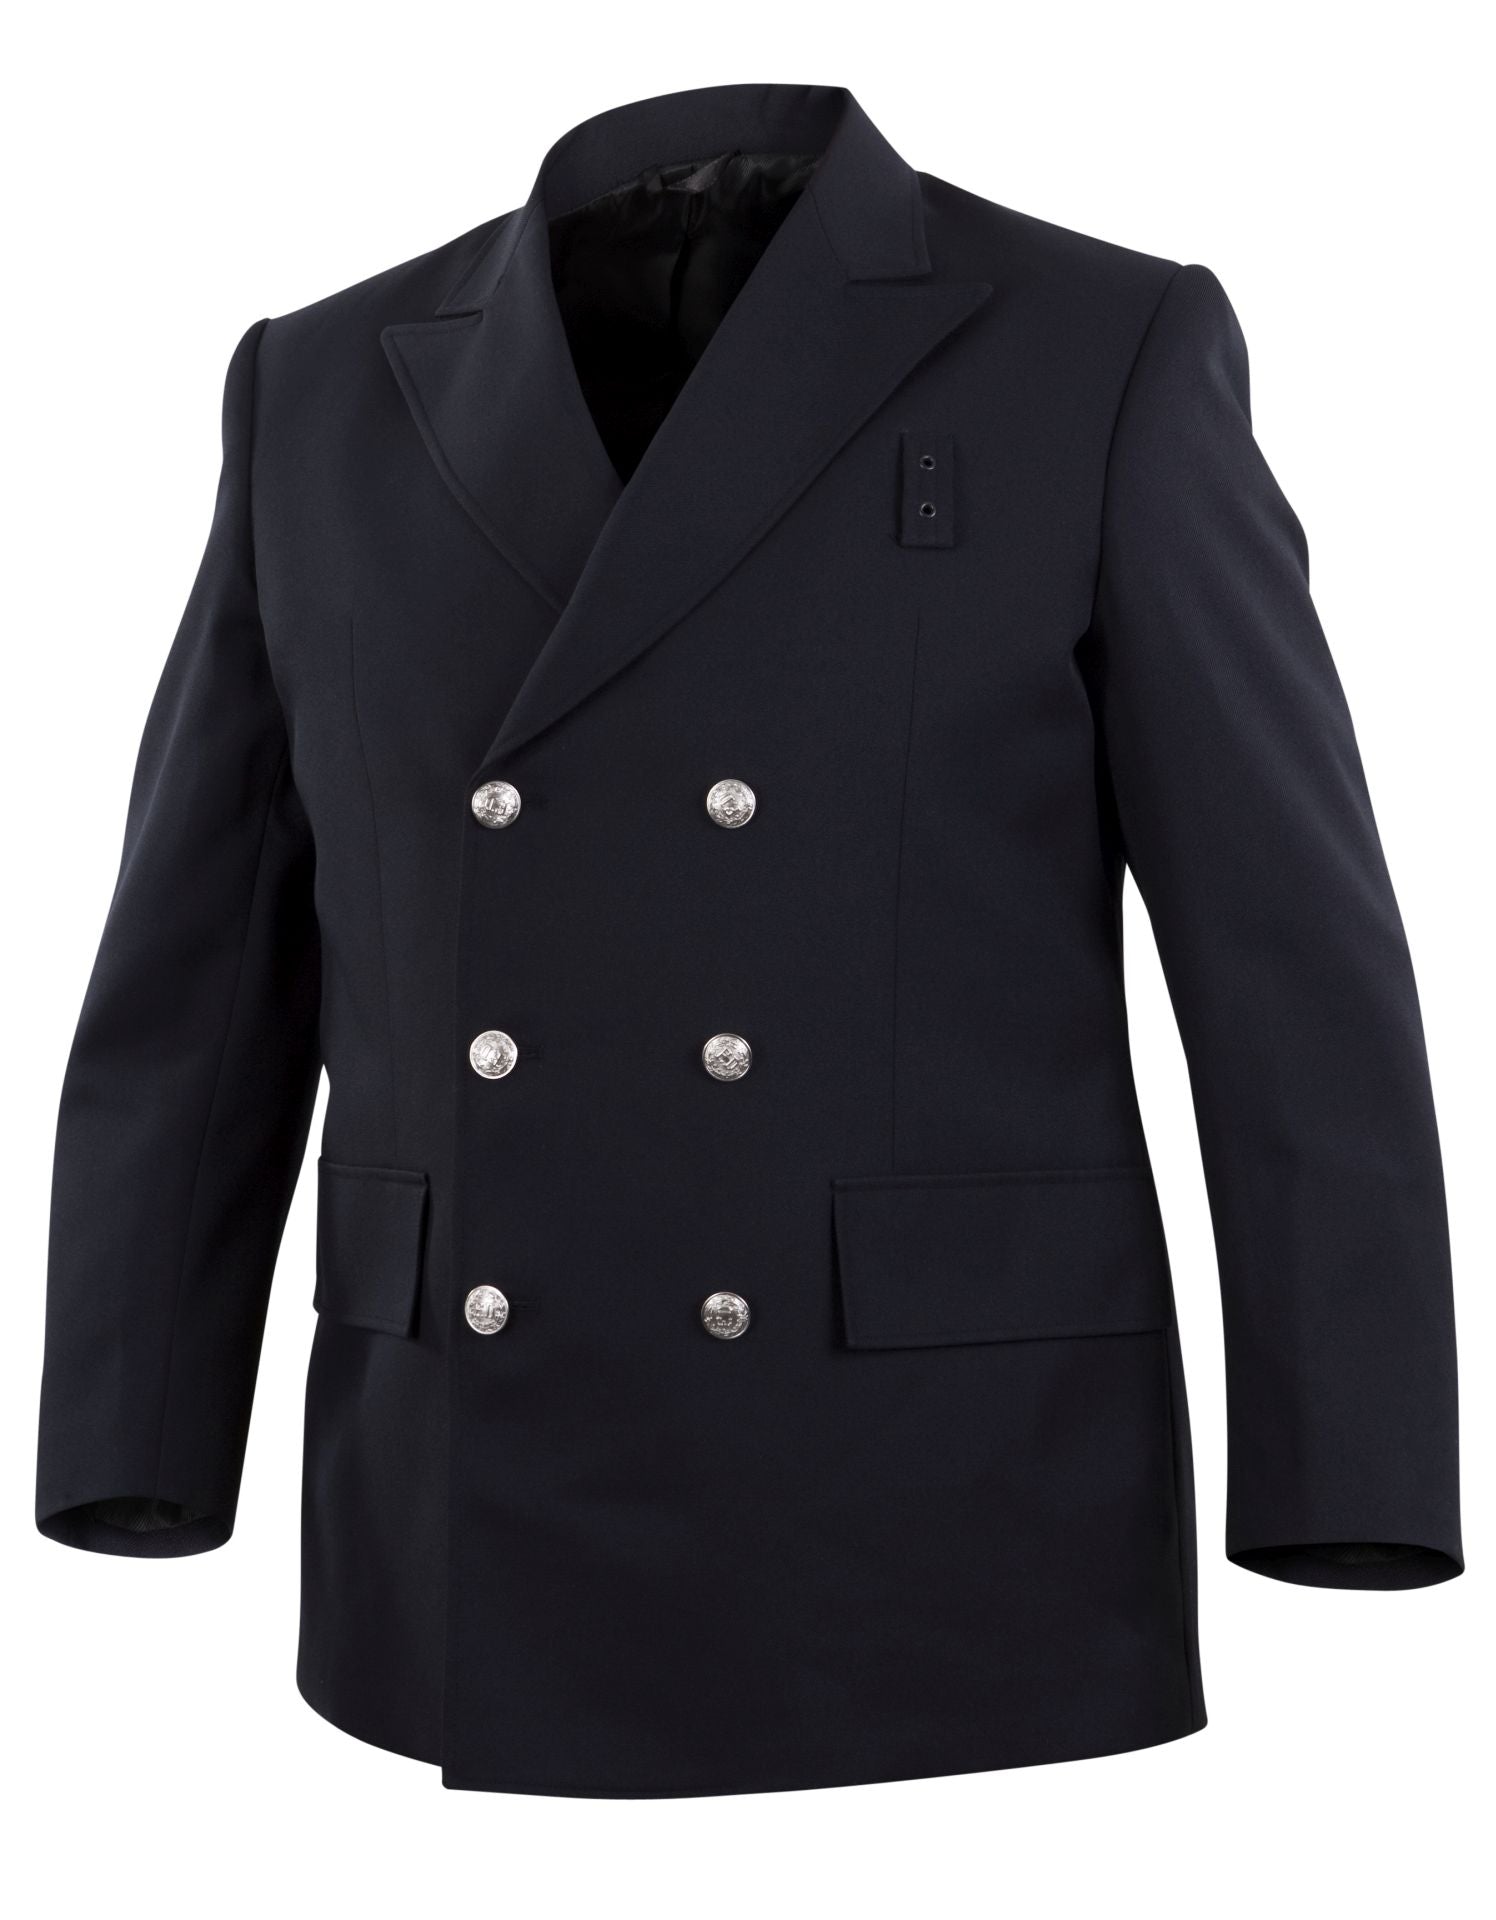 Top Authority Double-Breasted 2-Pocket Blousecoat-Elbeco